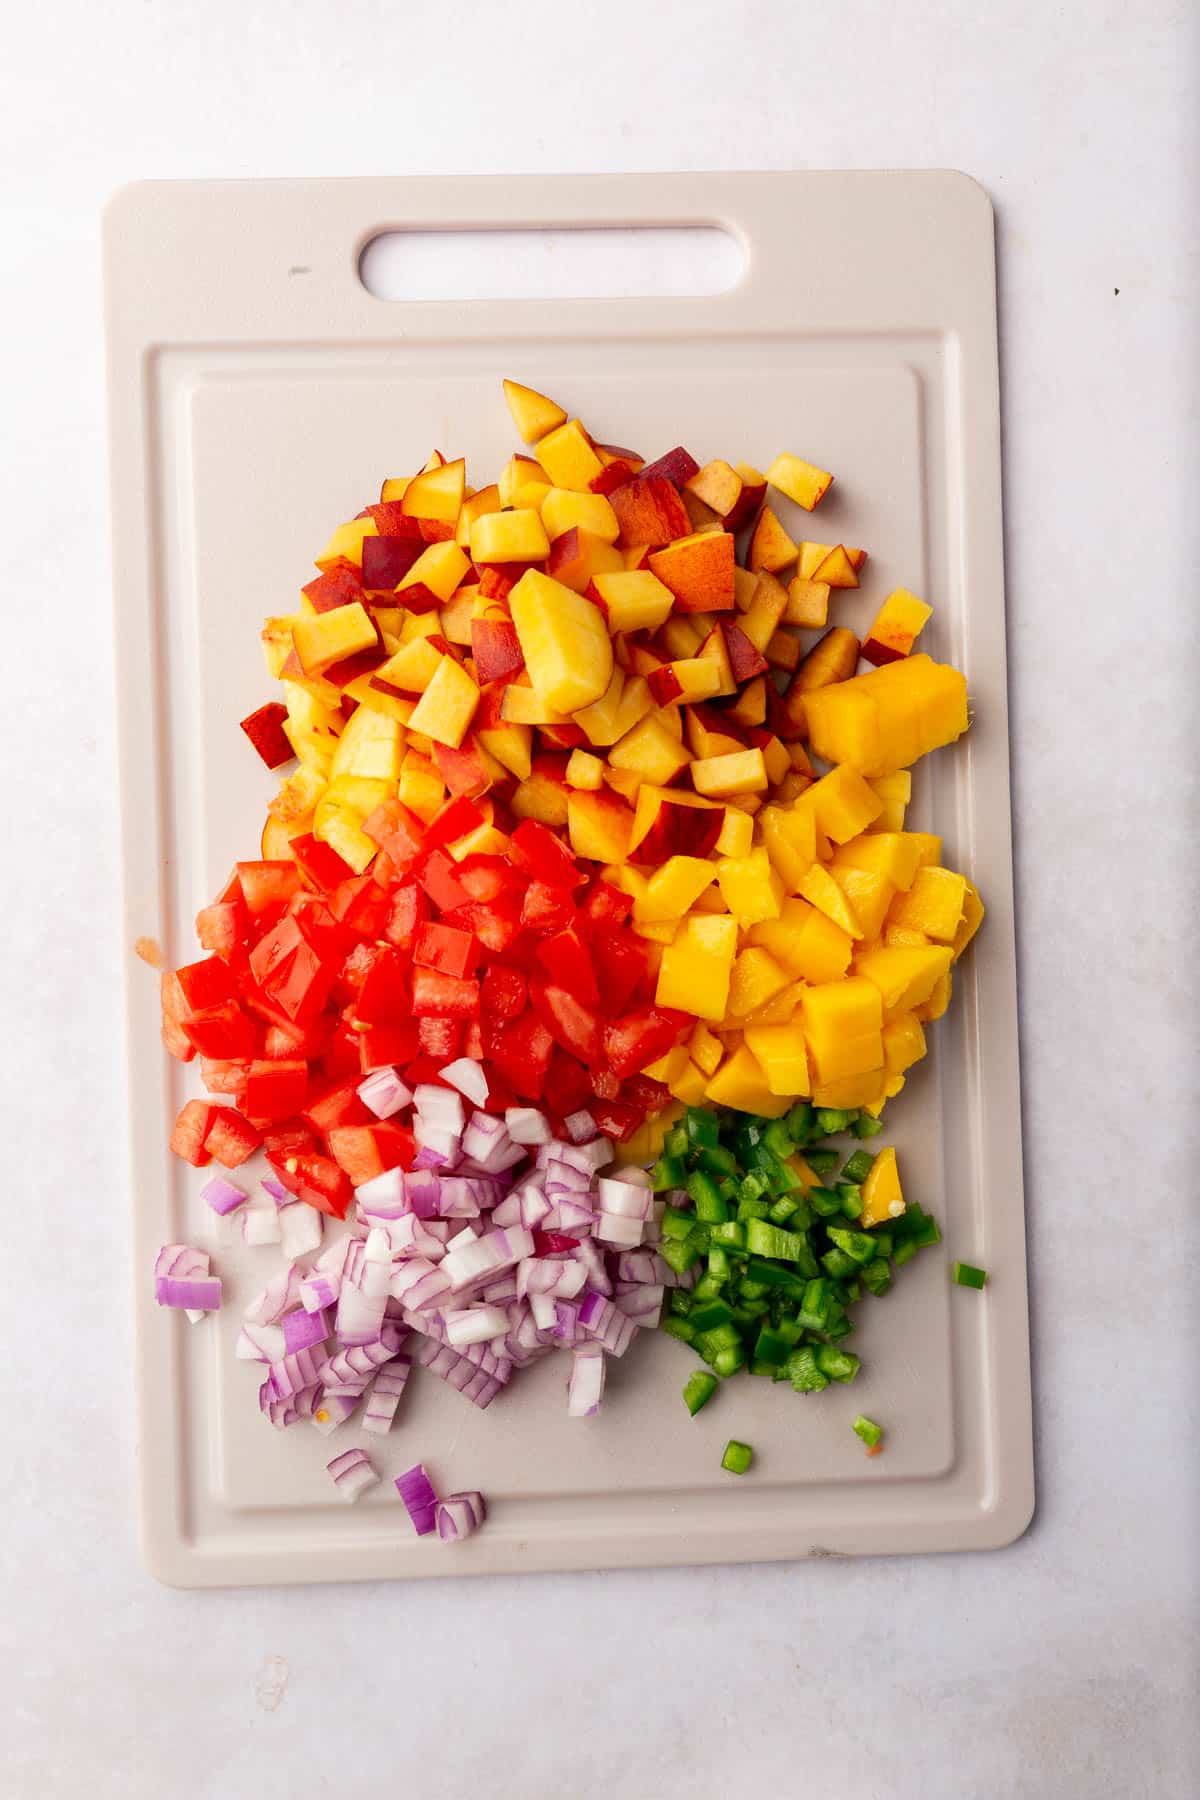 A cutting board with diced peaches, tomatoes, mango, red onion and jalapeño on it.